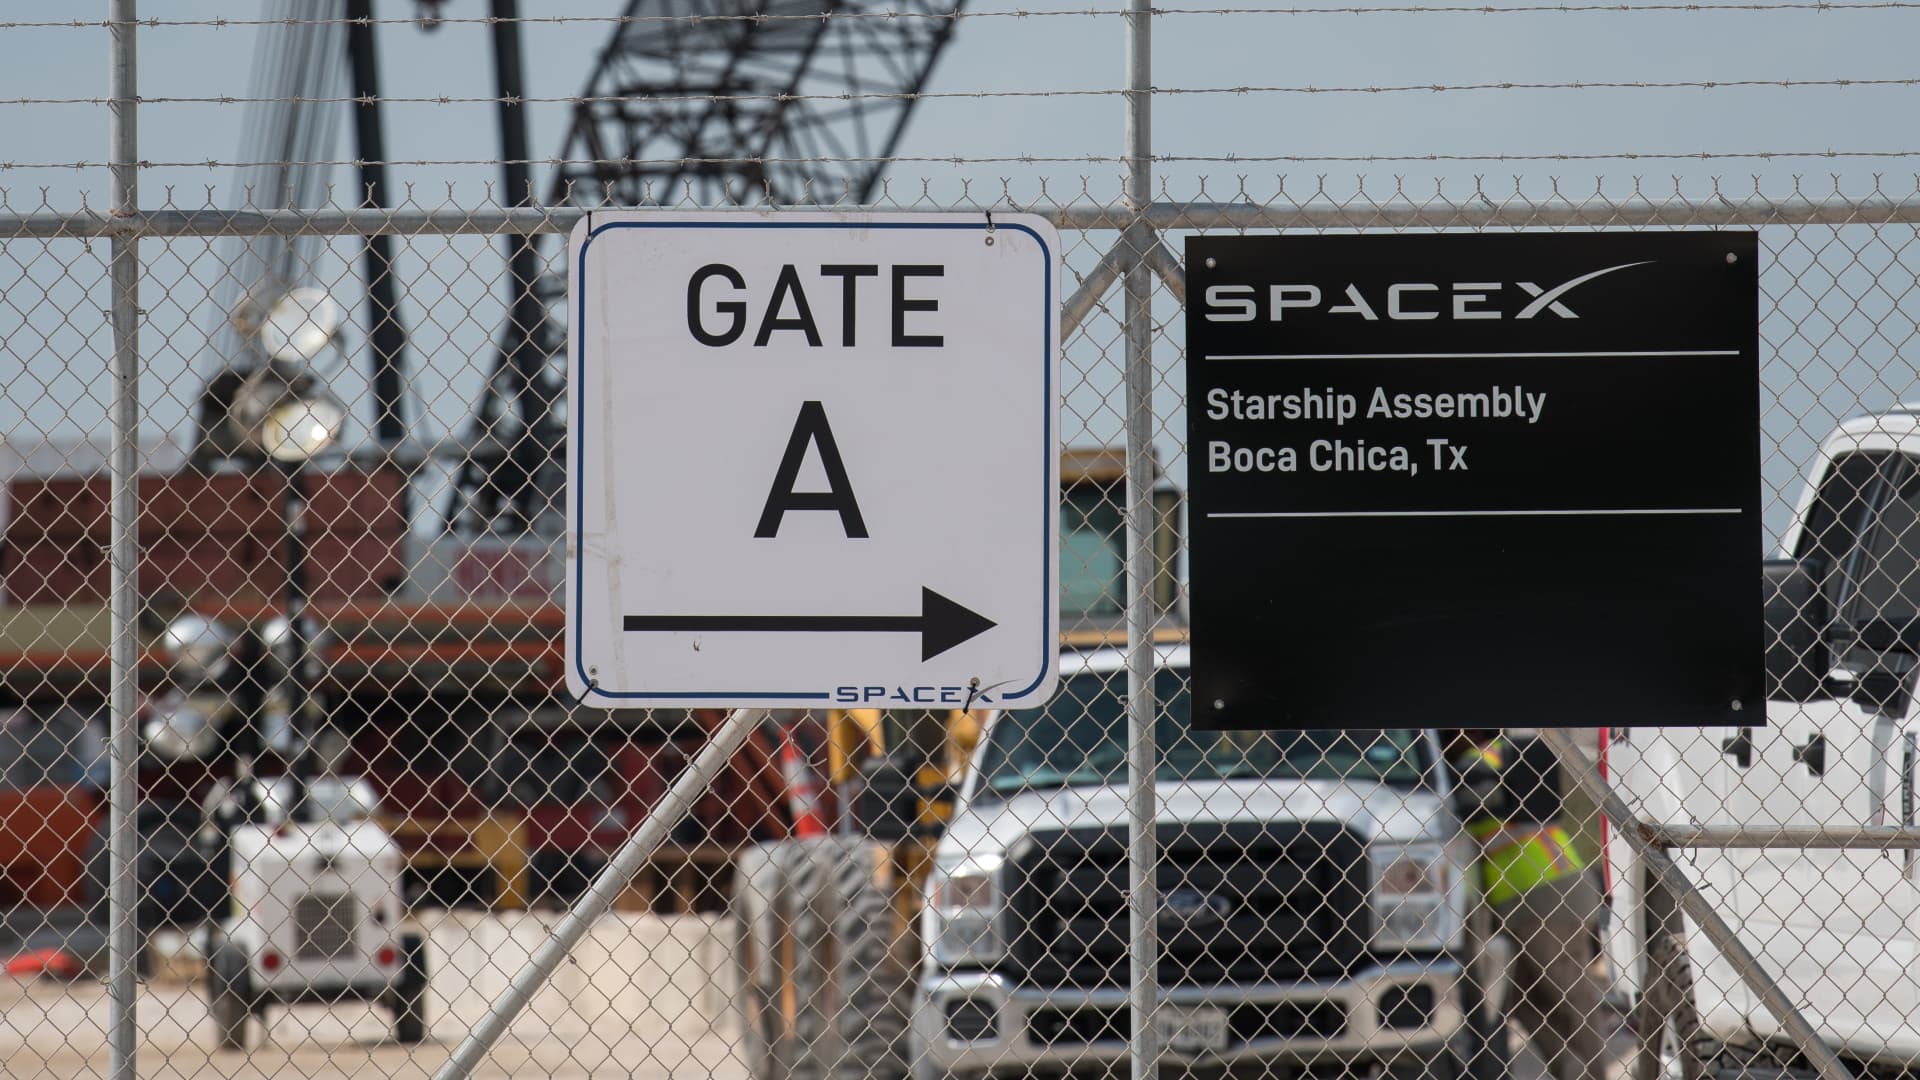 SpaceX is testing a "flame deflector" for Starship without permits